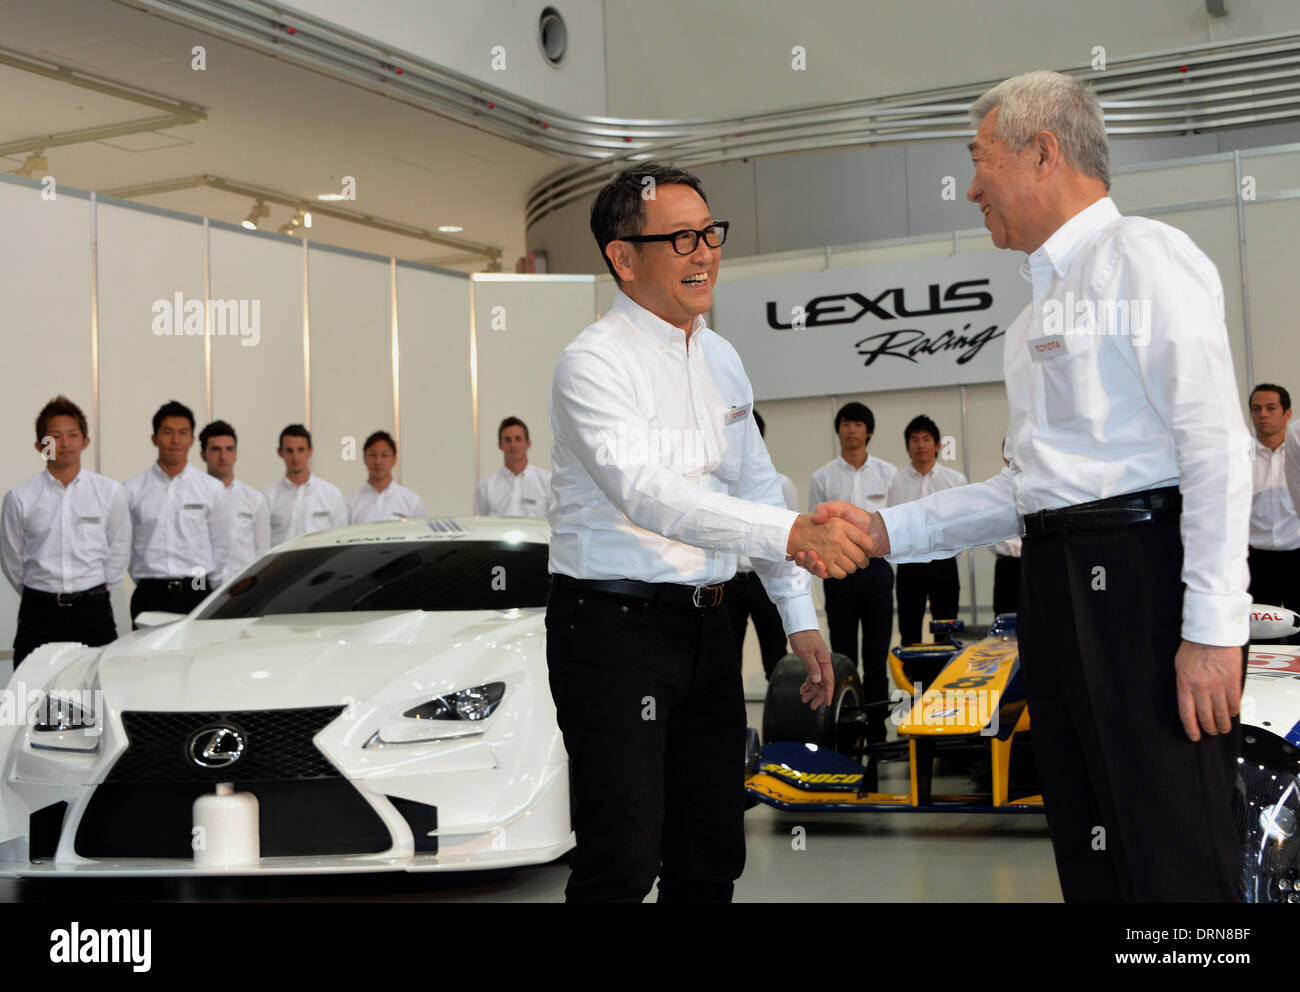 Tokyo, Japan. 30th Jan, 2014. President Akio Toyoda, left, of Japan's Toyota Motor Corp., shakes hands with its Vice Presdident Mitsuhisa Kato during a presentation of its motor sports activities for 2014 in Tokyo. They will include participation in the FIA World Endurance Championship and the Le Mans 24-hour race, the NASCAR racing series and the Super GT and Super Formula championships. Toyoda said its motor sports activities through Lexus Racing and Toyota Racing are aimed to bring more joy to more people through automobiles. Credit:  Natsuki Sakai/AFLO/Alamy Live News Live News) Stock Photo